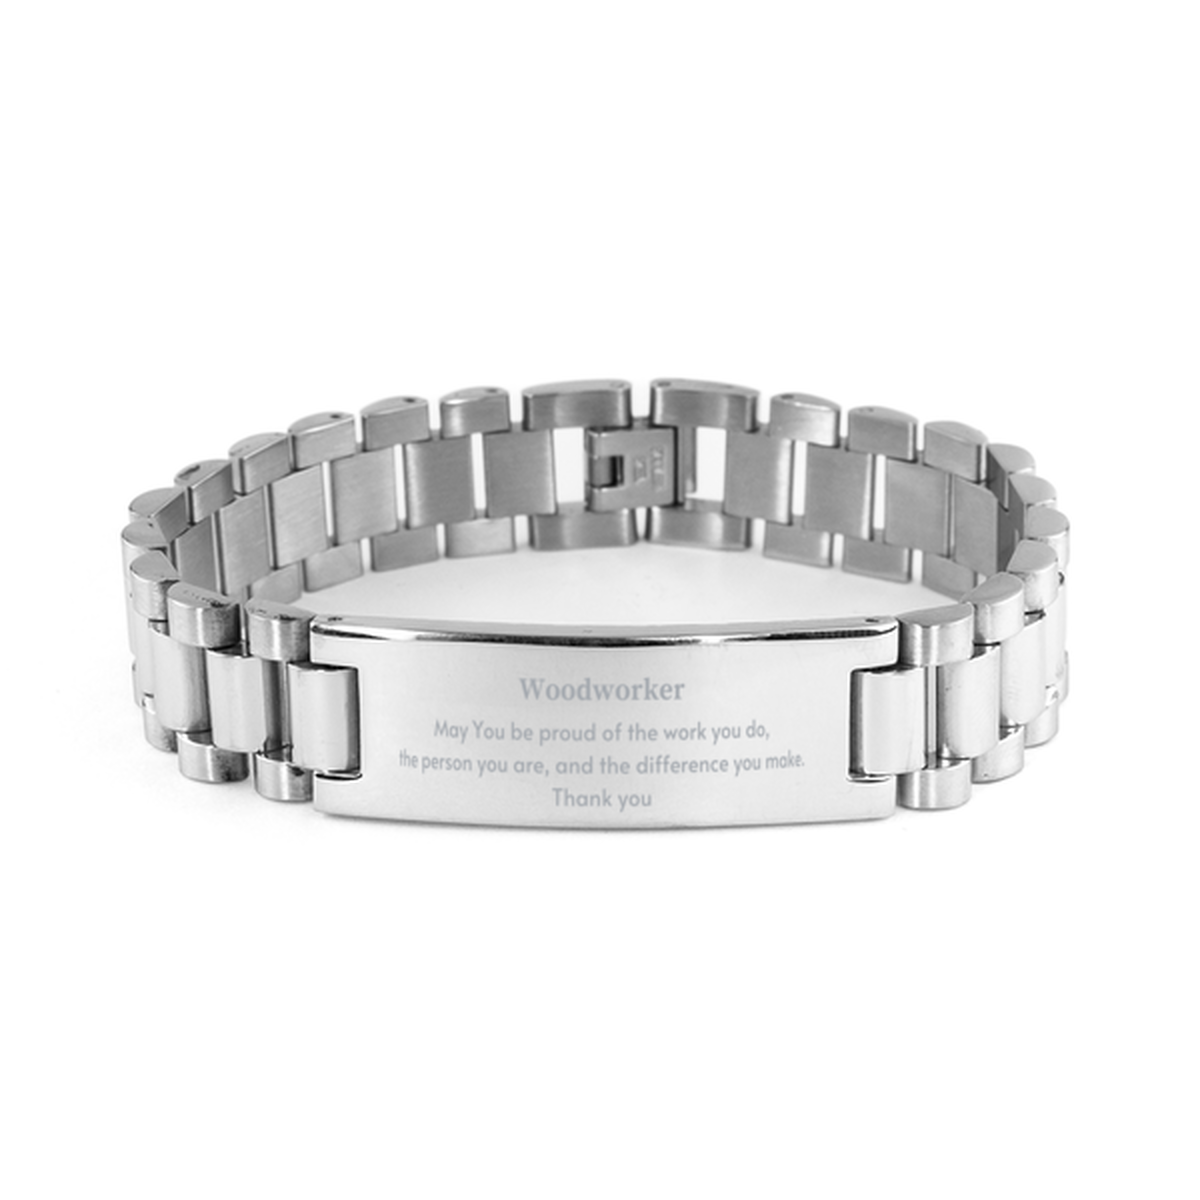 Heartwarming Ladder Stainless Steel Bracelet Retirement Coworkers Gifts for Woodworker, Woodworker May You be proud of the work you do, the person you are Gifts for Boss Men Women Friends